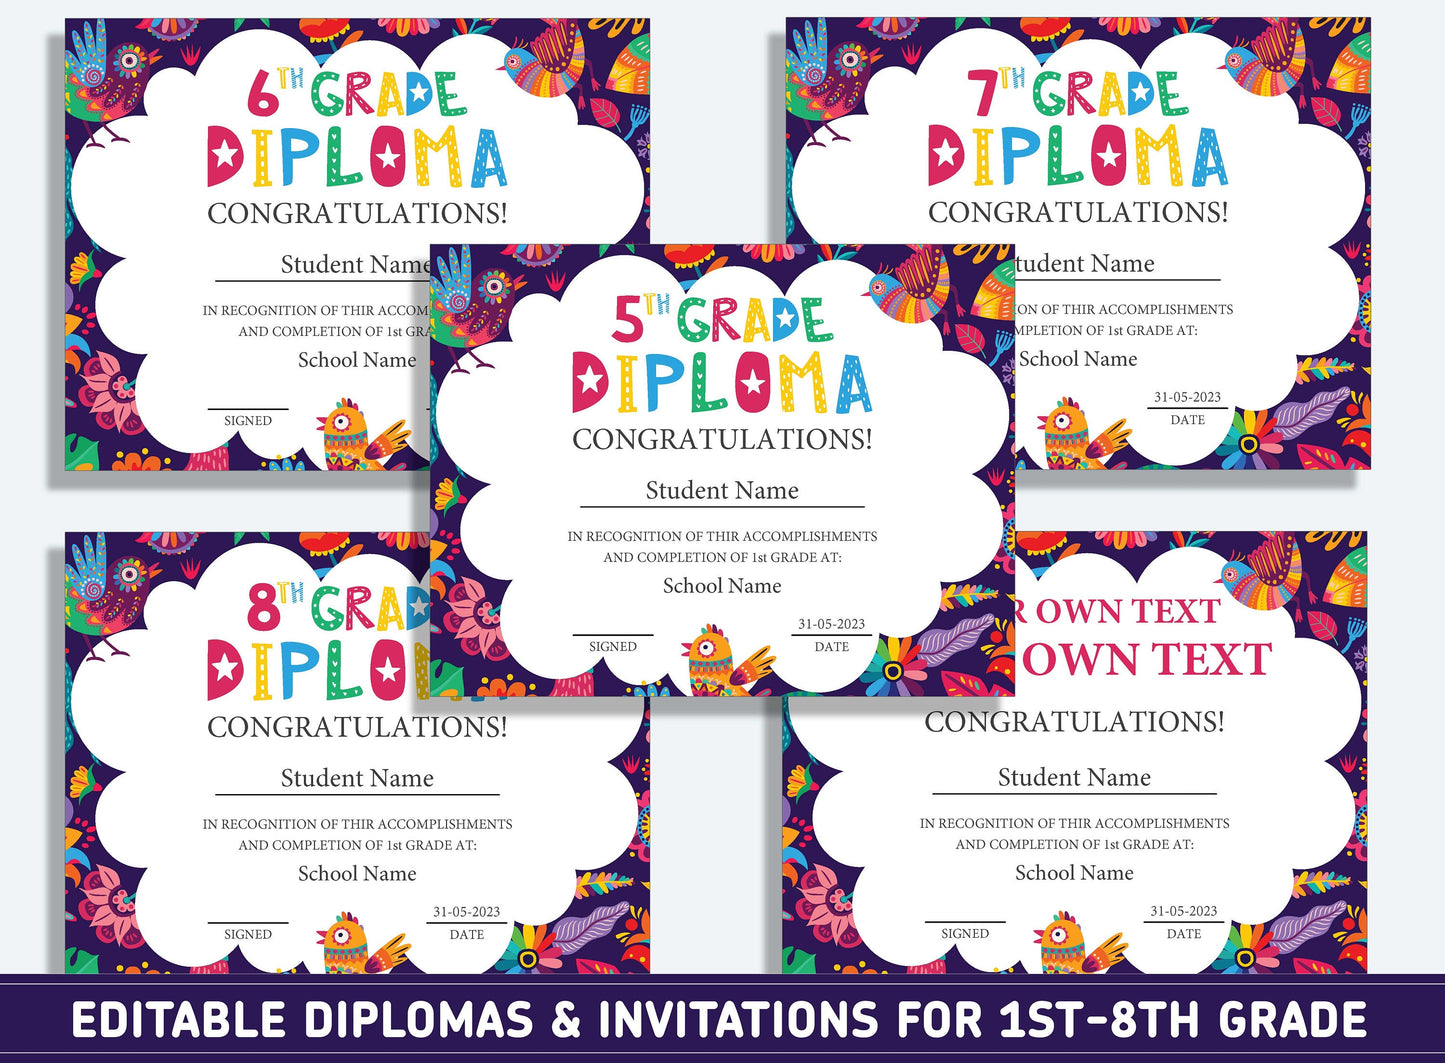 Editable 4th Grade Certificate, 1st to 8th Grade Diploma, Certificate of Completion & Invitation, PDF File, Instant Download